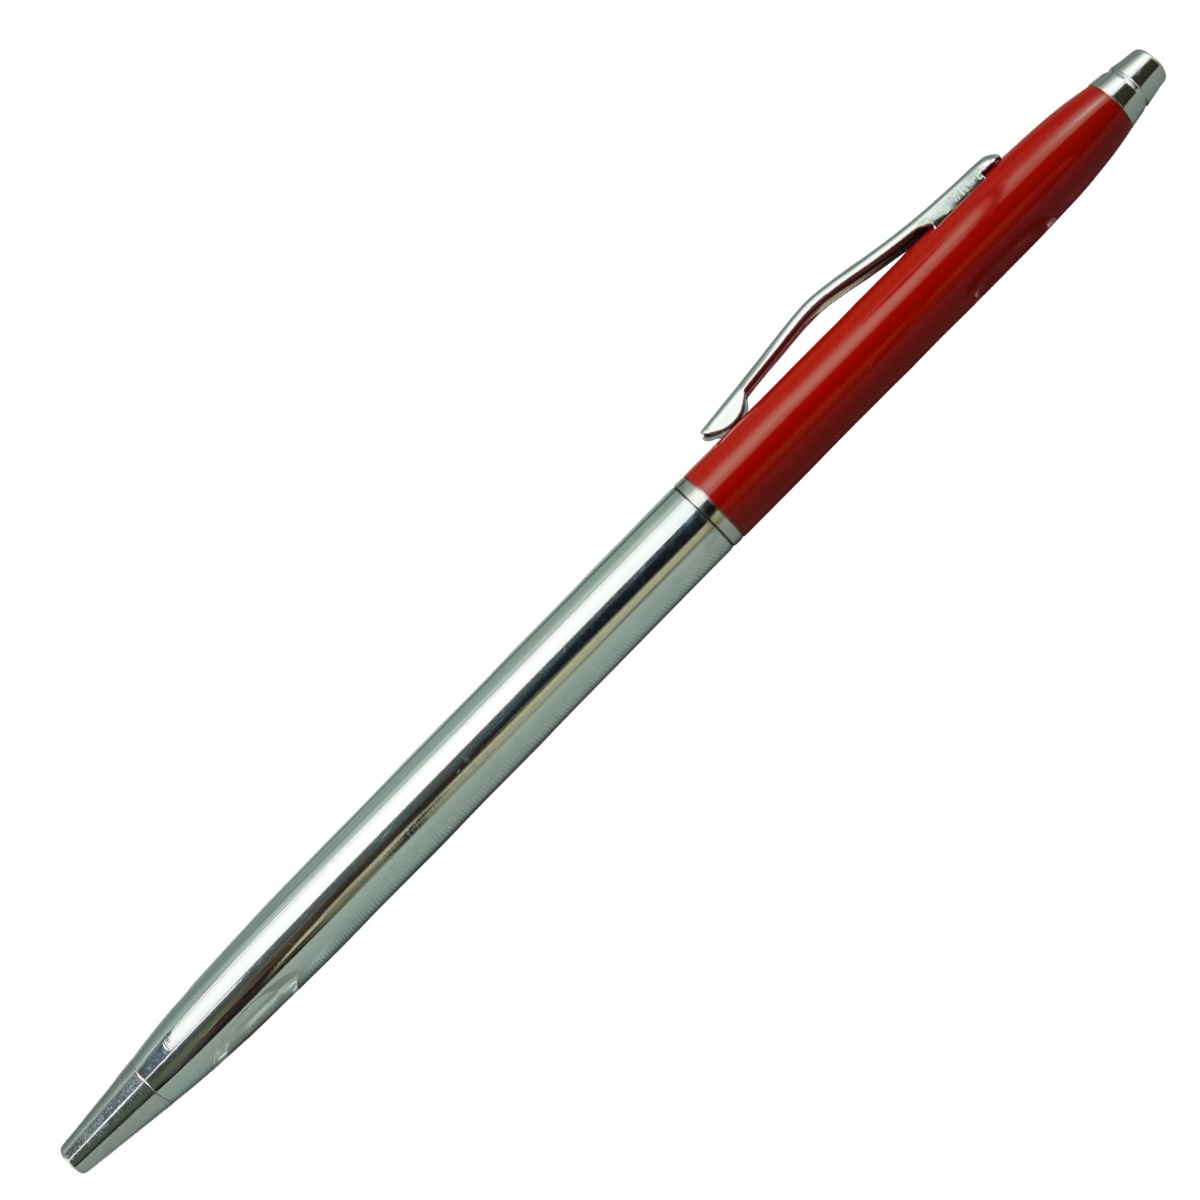 Penhouse Model:16146 Slim Type Silver With Red Color  Twist Type Body  Medium Tip  Ball Pen